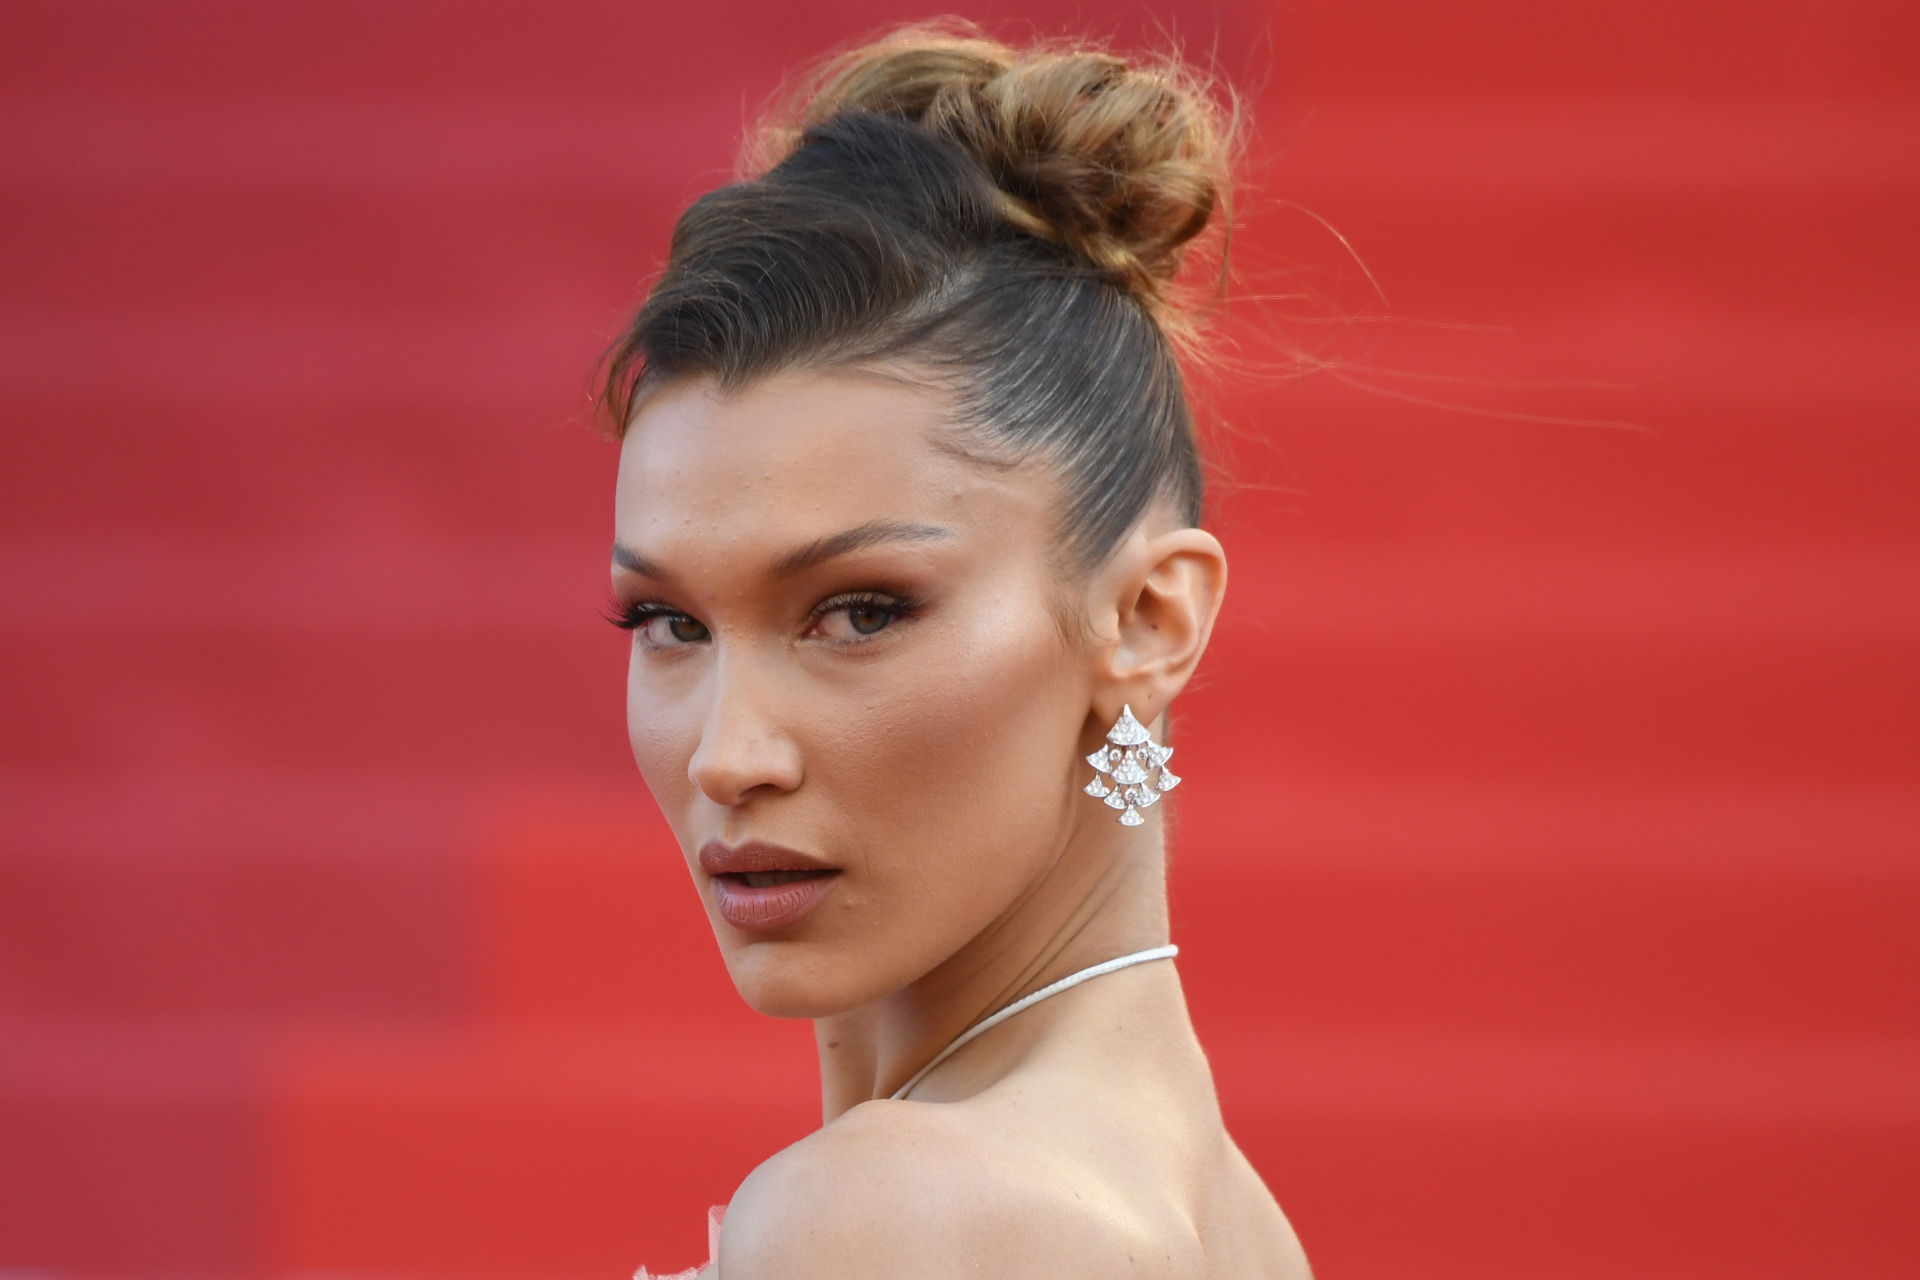 10 best hairstyles that rocked the red carpet in 2019